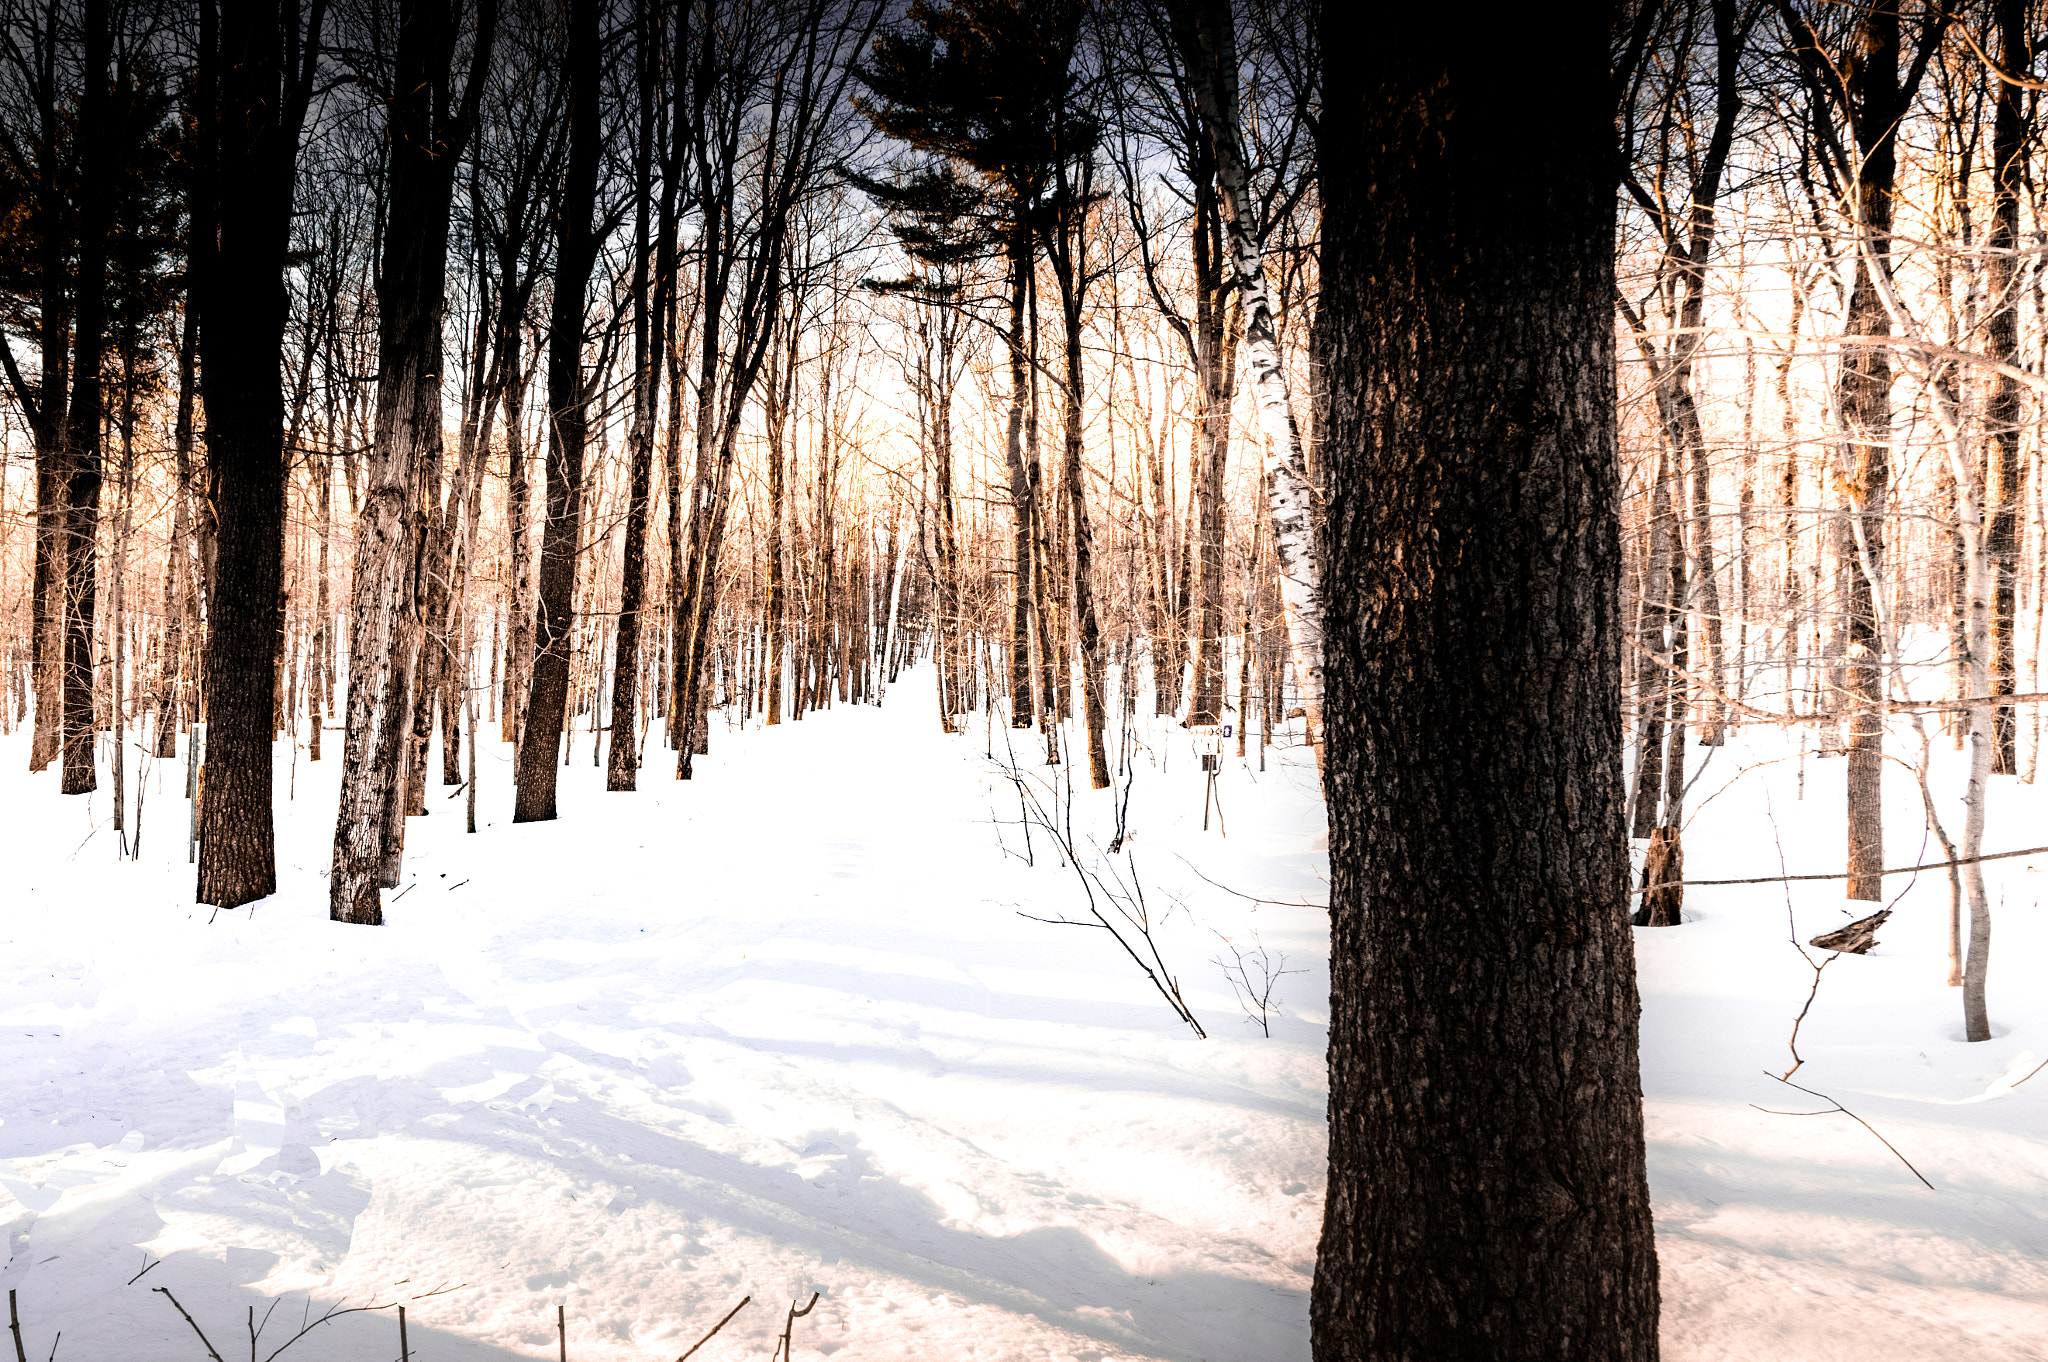 Pentax K-3 II sample photo. Into the snowy forest photography